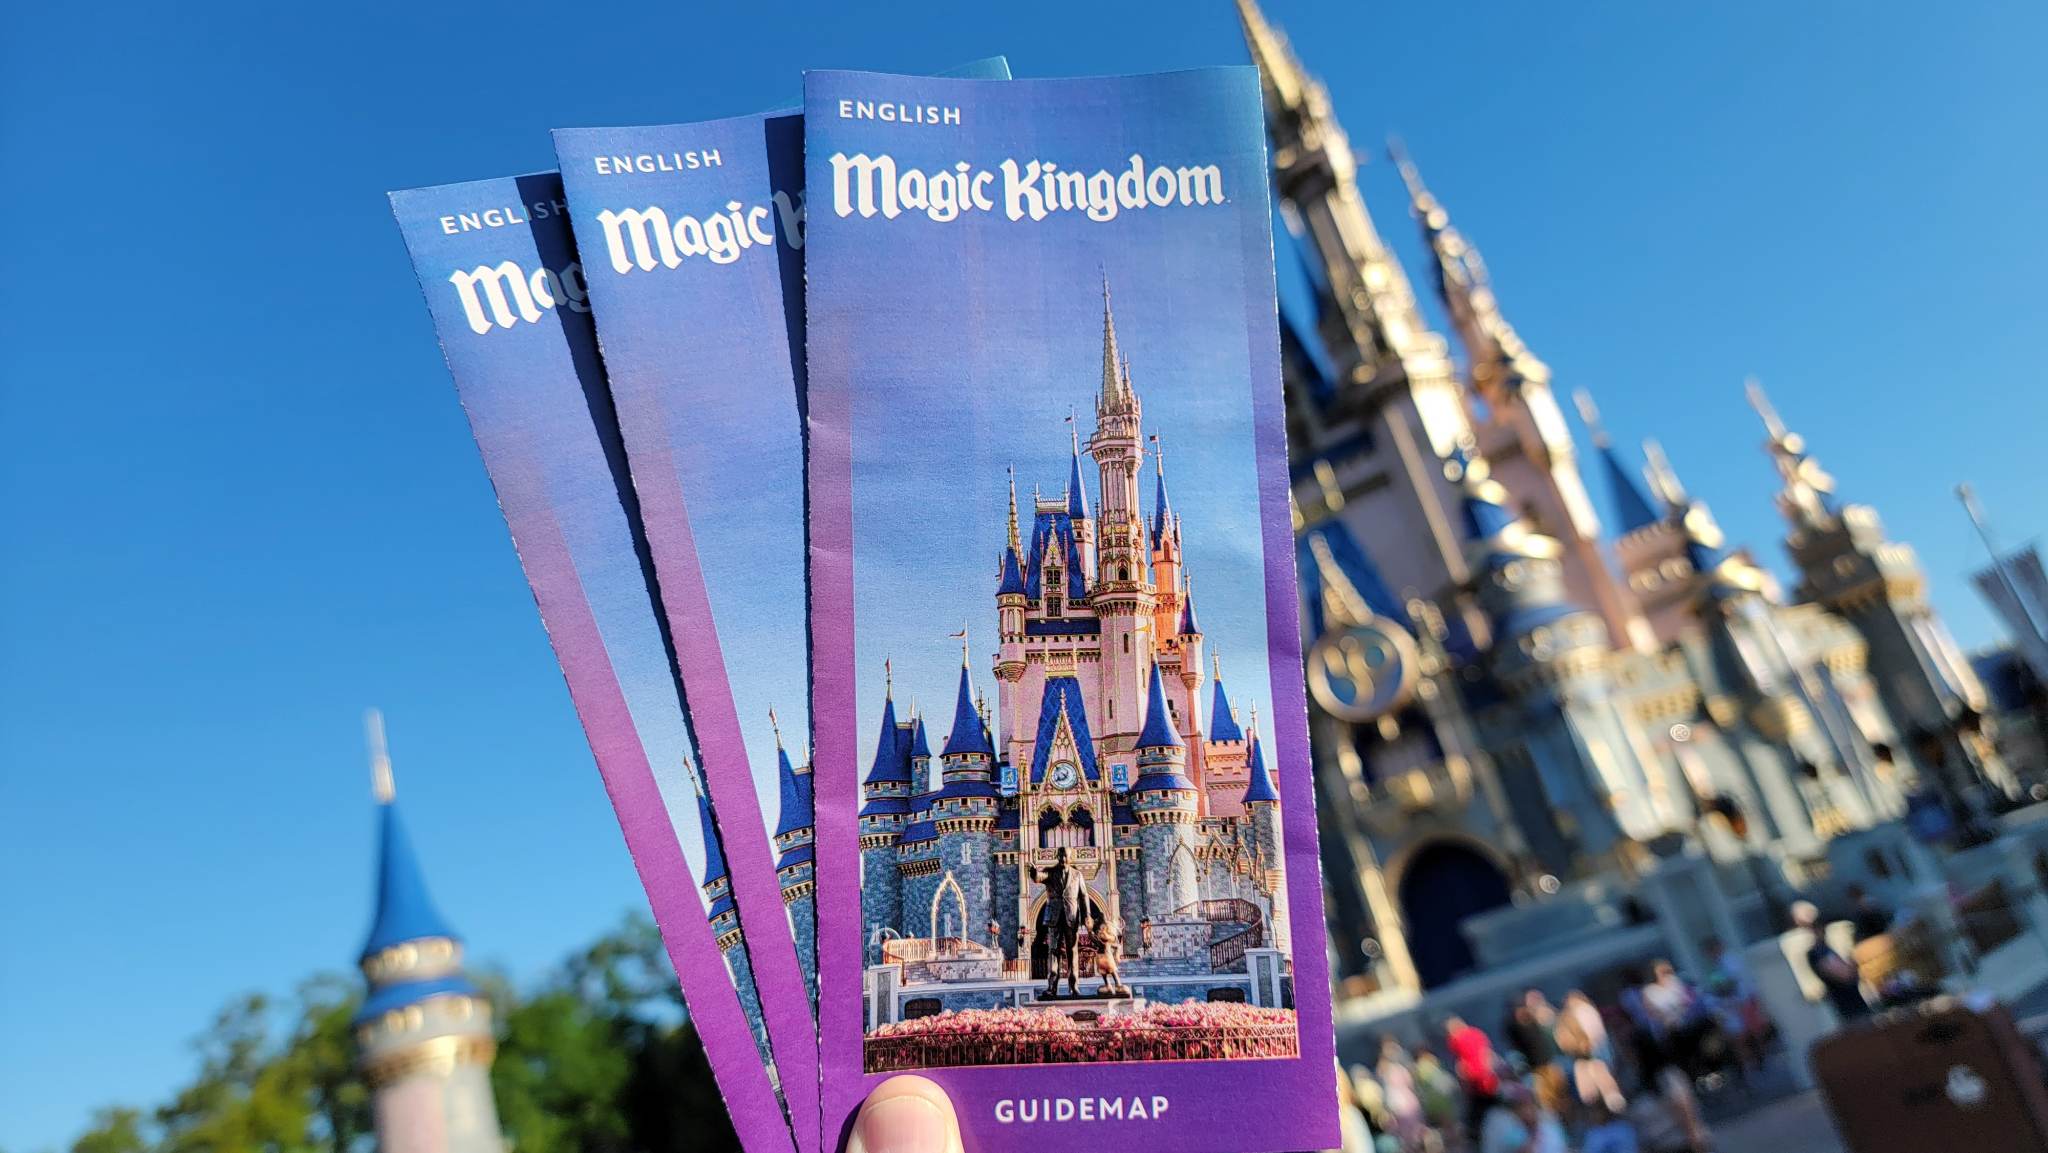 Magic Kingdom Park Map Removes All Mention of Disney World 50th